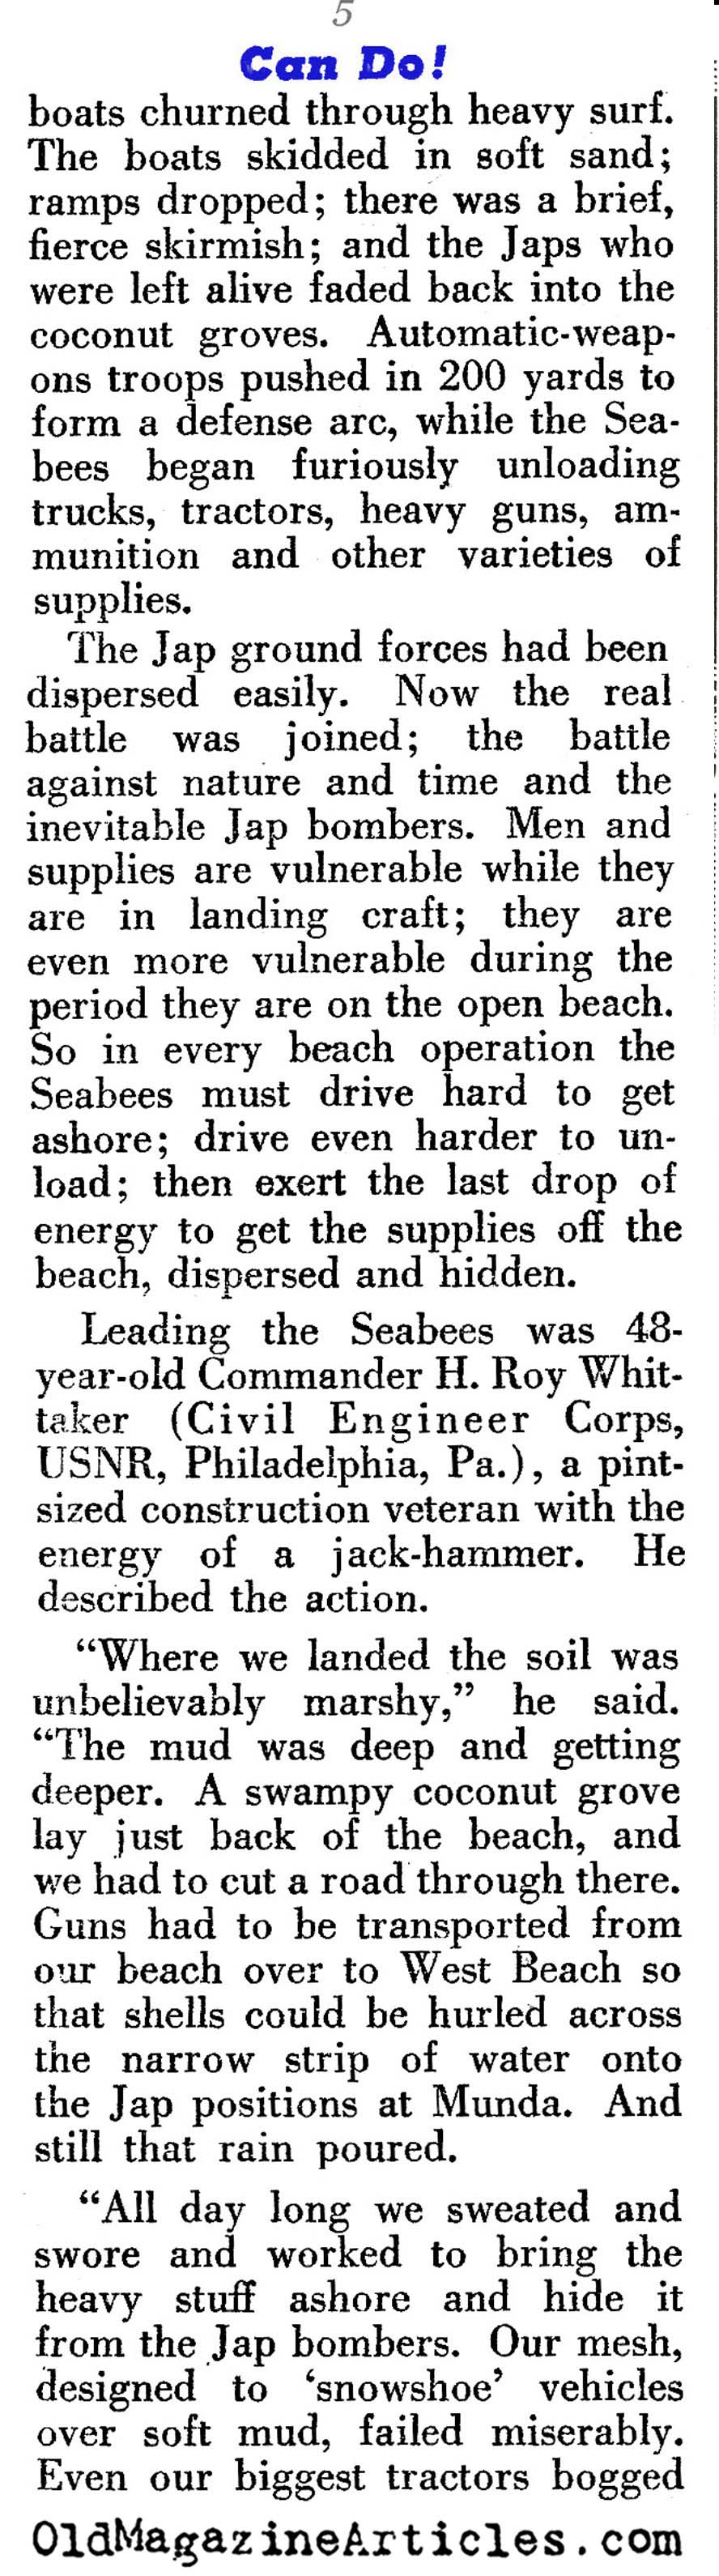 The Seabees (Pageant Magazine, 1944)